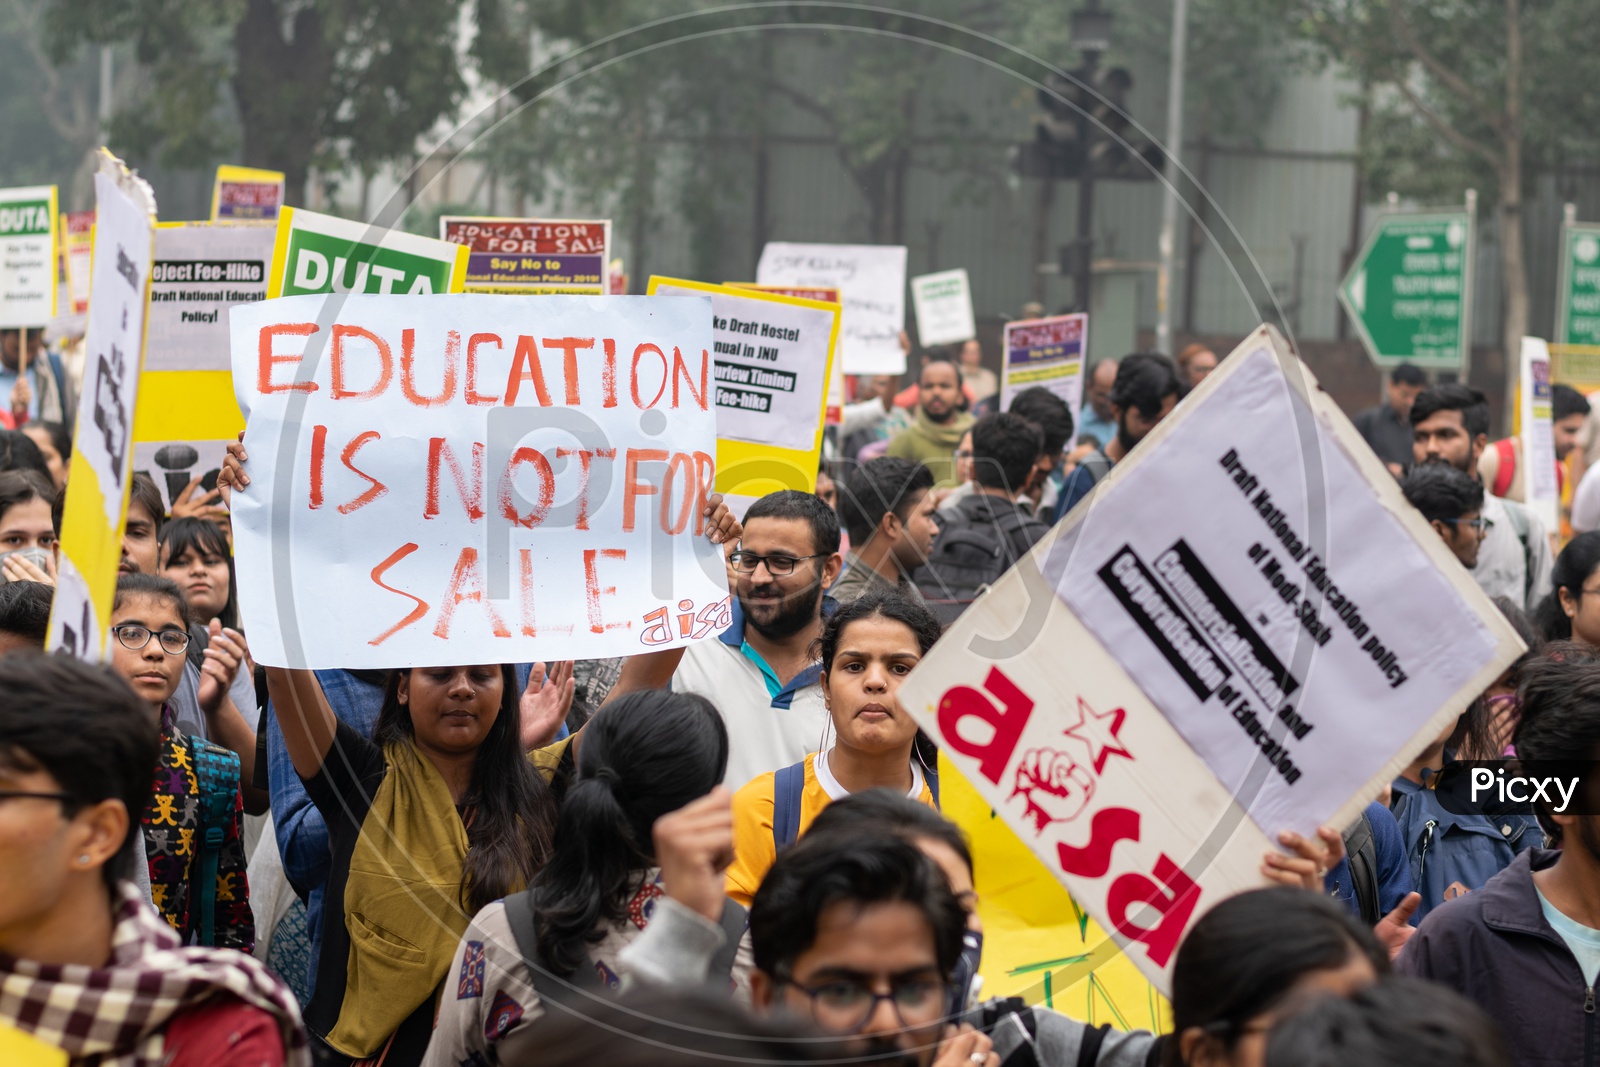 A girl with 'Education is not for sale' banner and Students and teachers from different universities and different organisations demanding withdrawal of draft 'National Education Policy 2019' and protesting against other issues related to Education